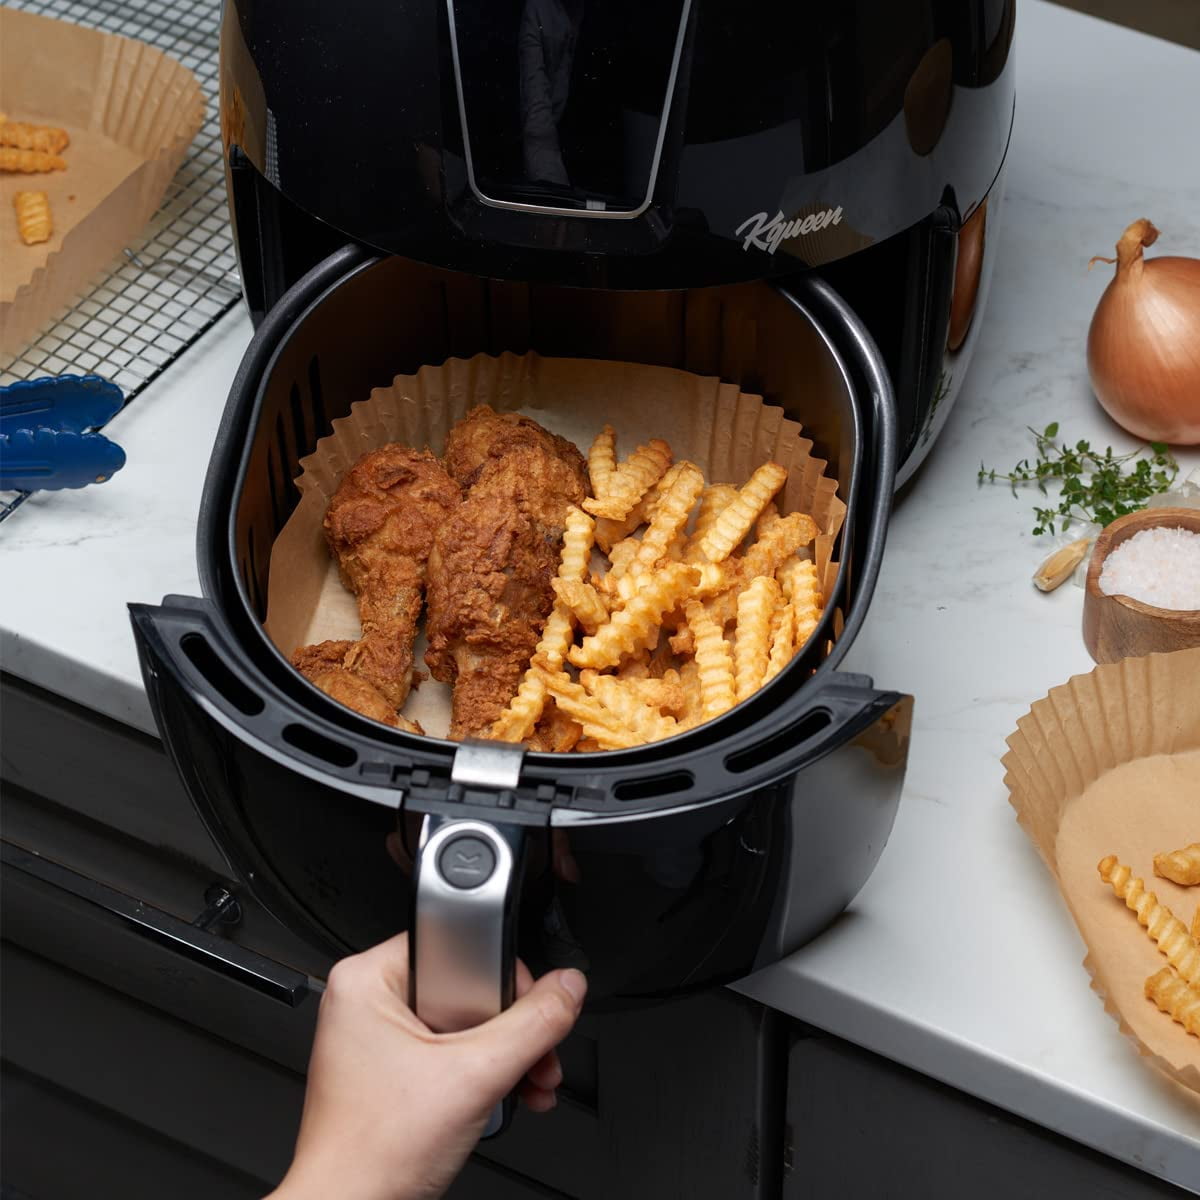  Air Fryer Liners Disposable 8 Inch Square, CBHD 130